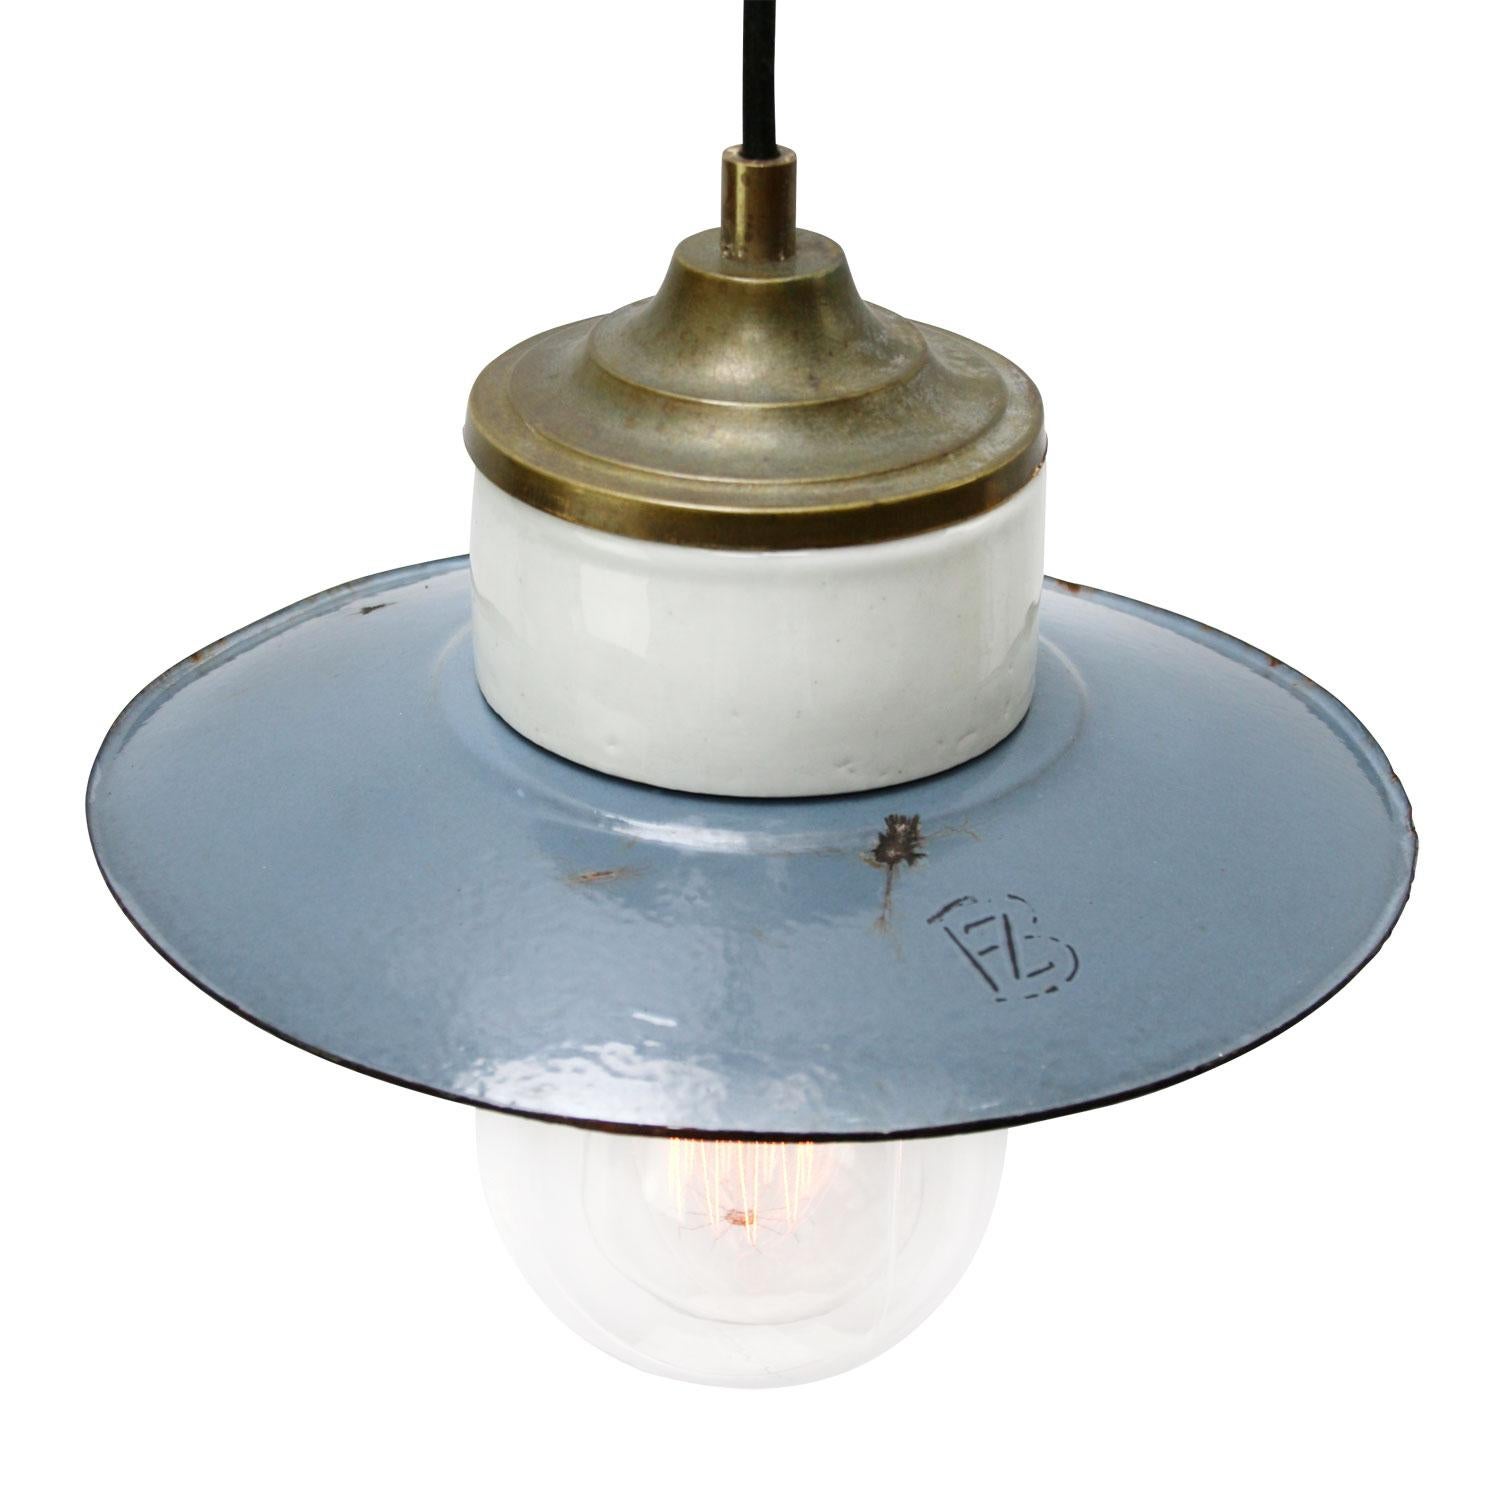 Porcelain Industrial hanging lamp.
Blue porcelain, brass and clear glass.
Enamel shade
2 conductors, no ground.

Weight: 1.40 kg / 3.1 lb

Priced per individual item. All lamps have been made suitable by international standards for